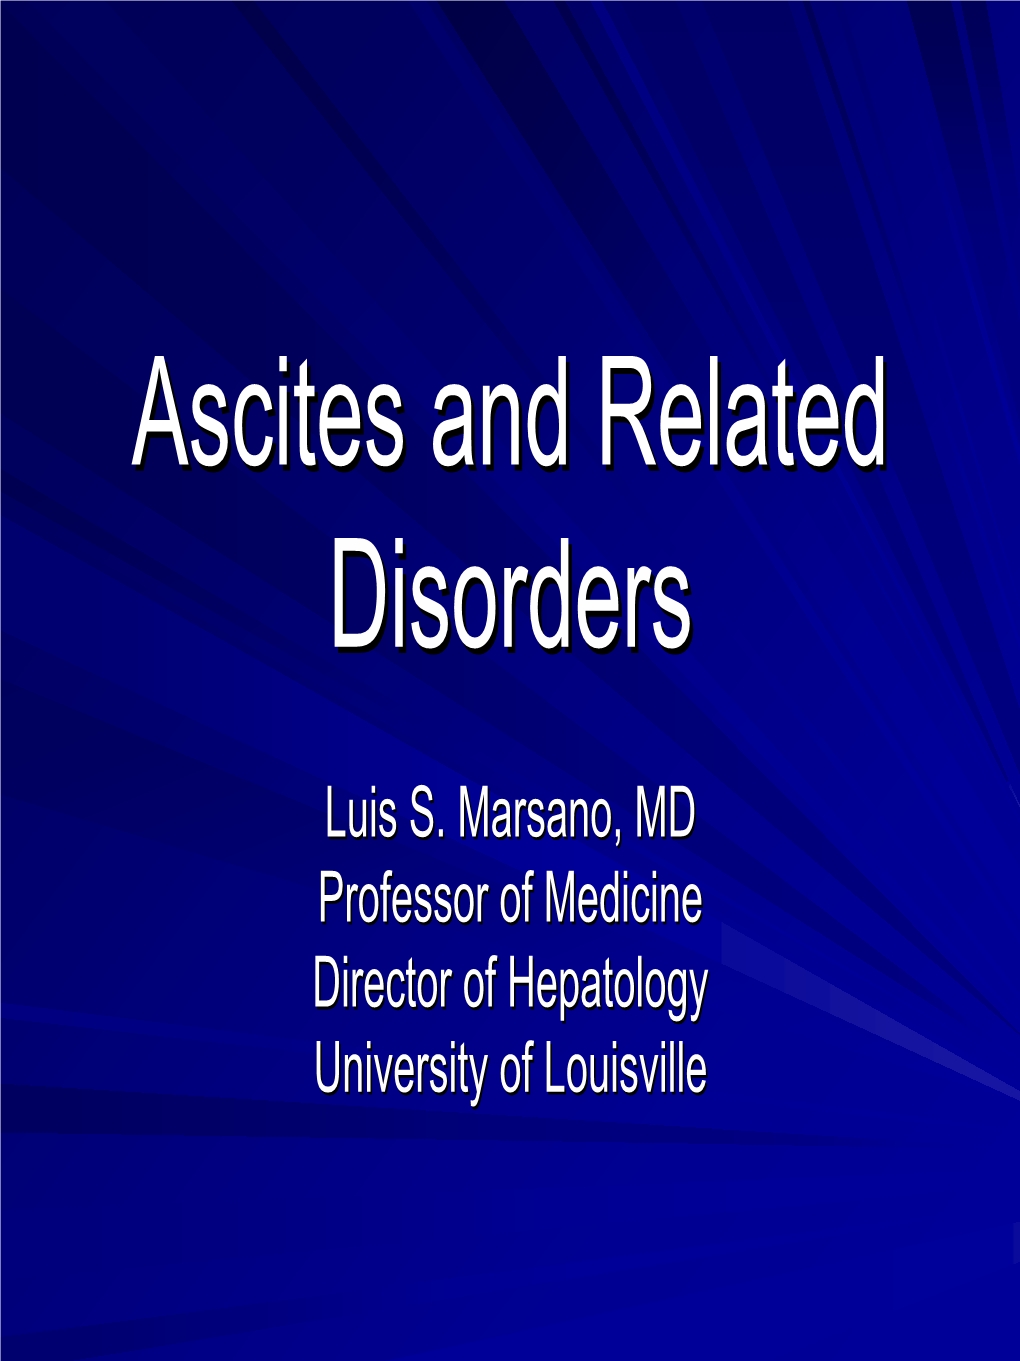 Ascites and Related Disorders